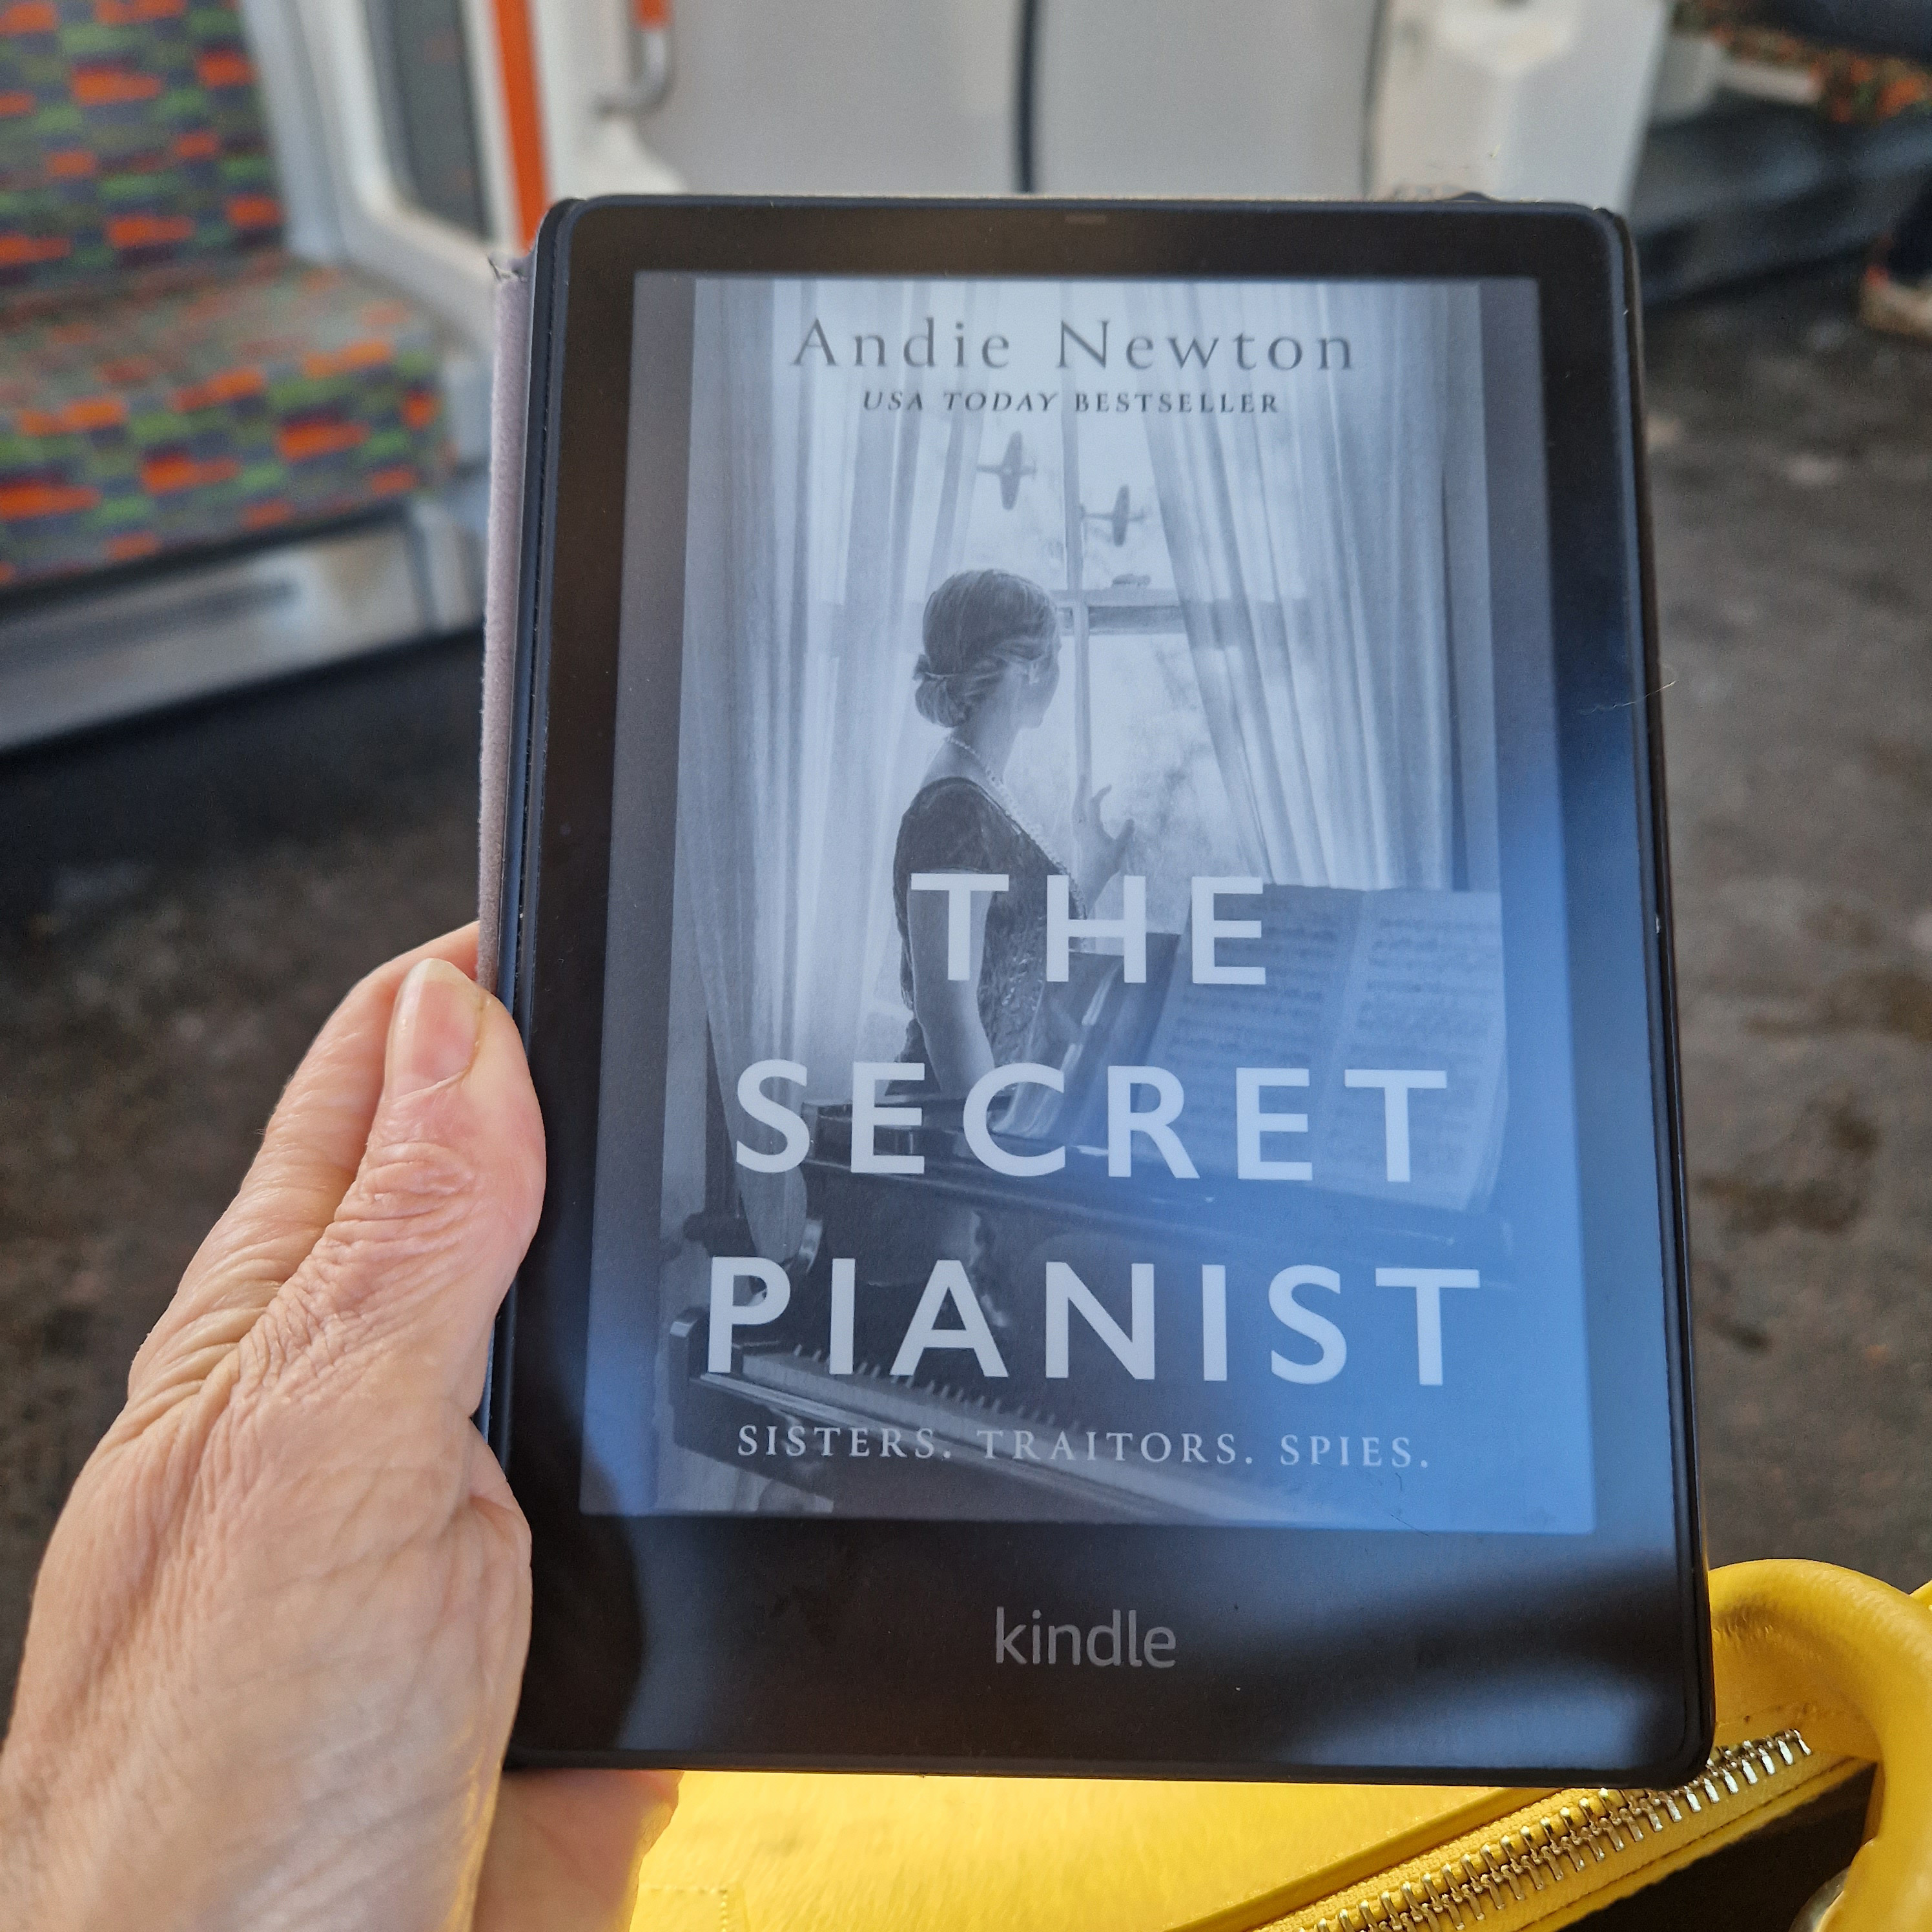 Is This Mutton reads The Secret Pianist on her Kindle on a train in London